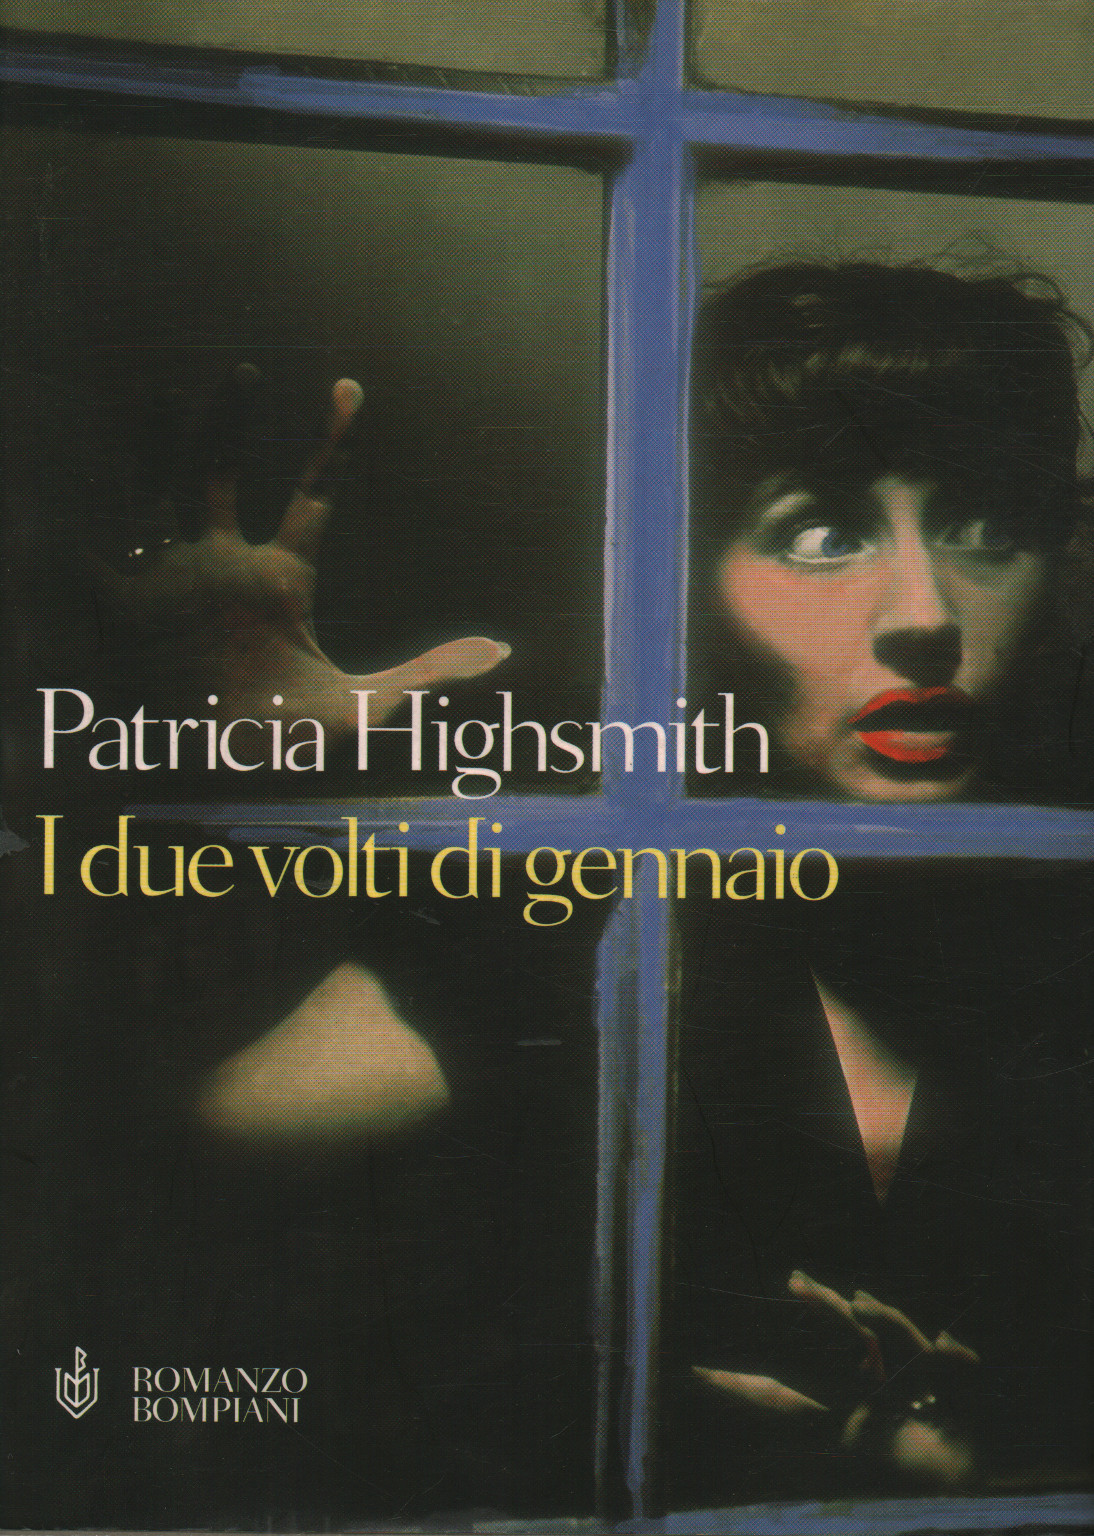 The two faces of January, Patricia Highsmith